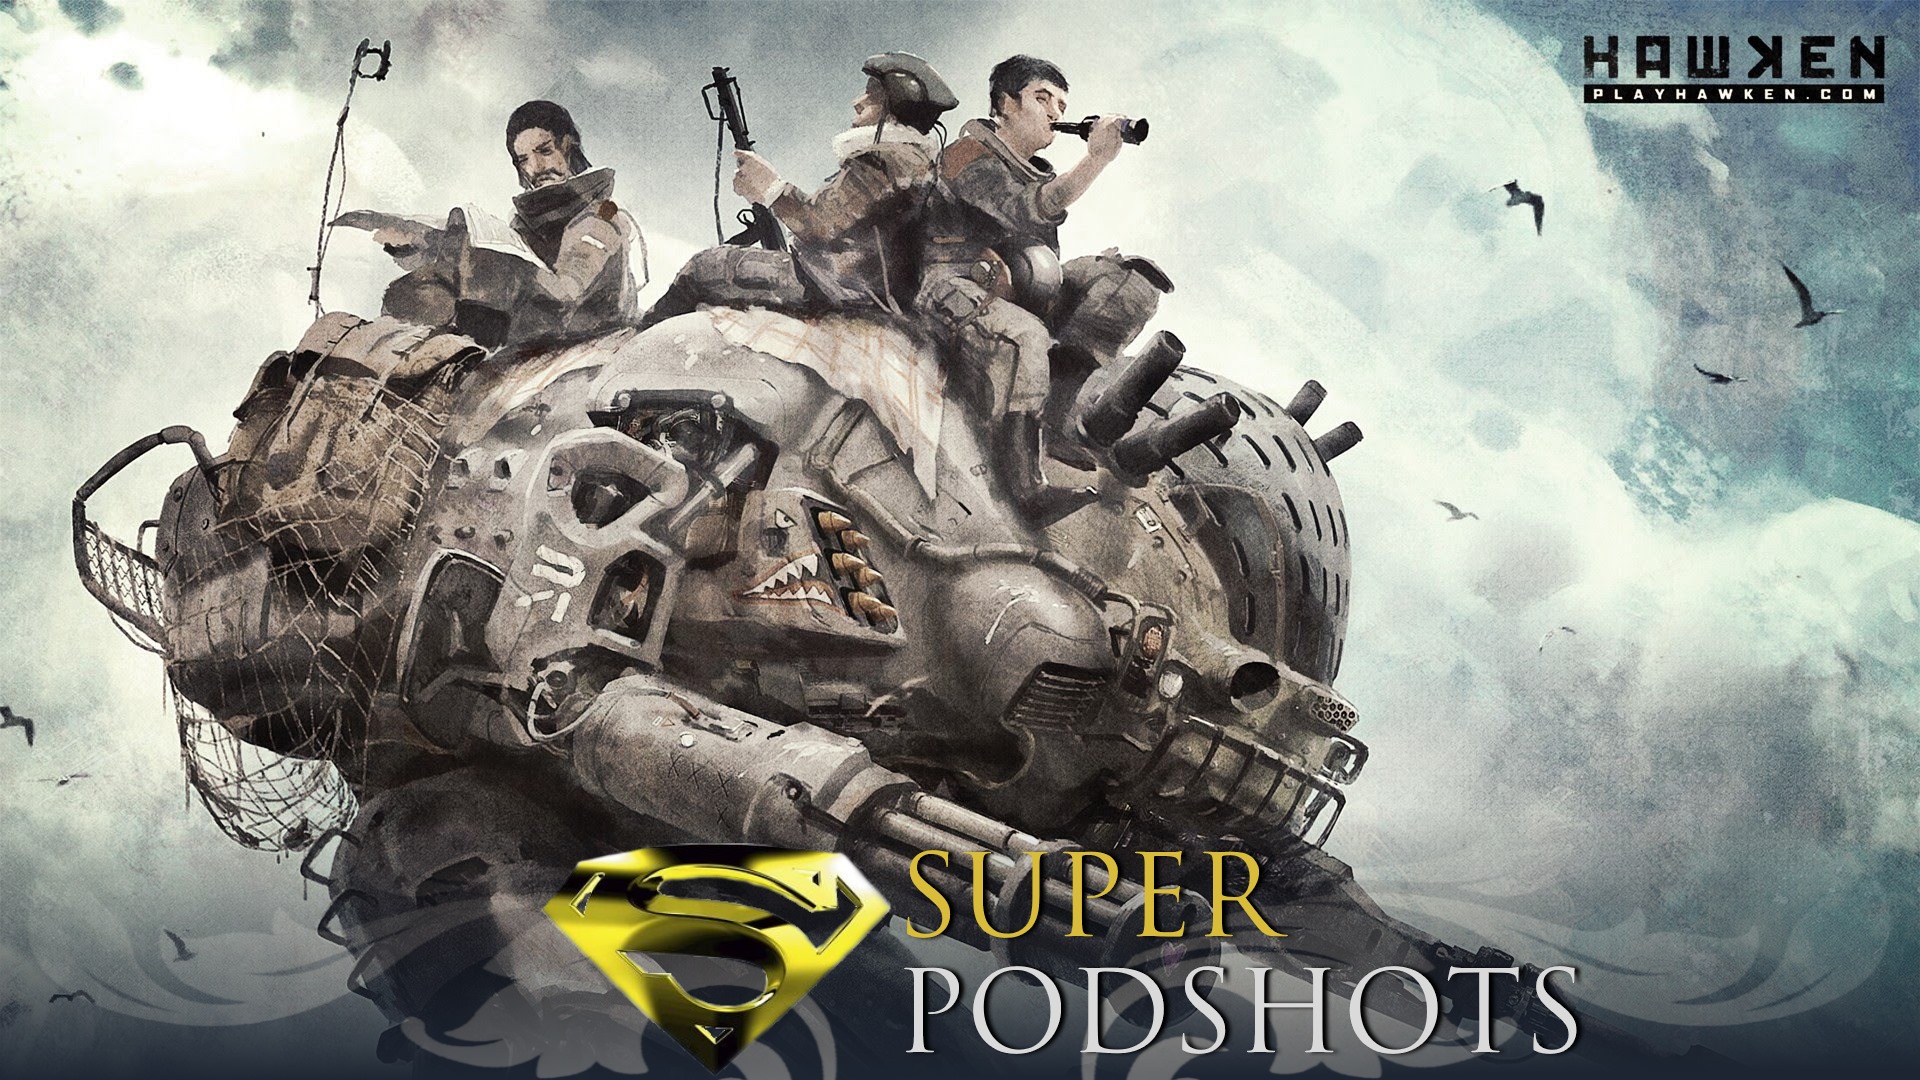 Super Podshots Ep. 47 - Rumor: Sell Fable To Save LionHead, Capcom dropping 2 games in 2017 & More. 